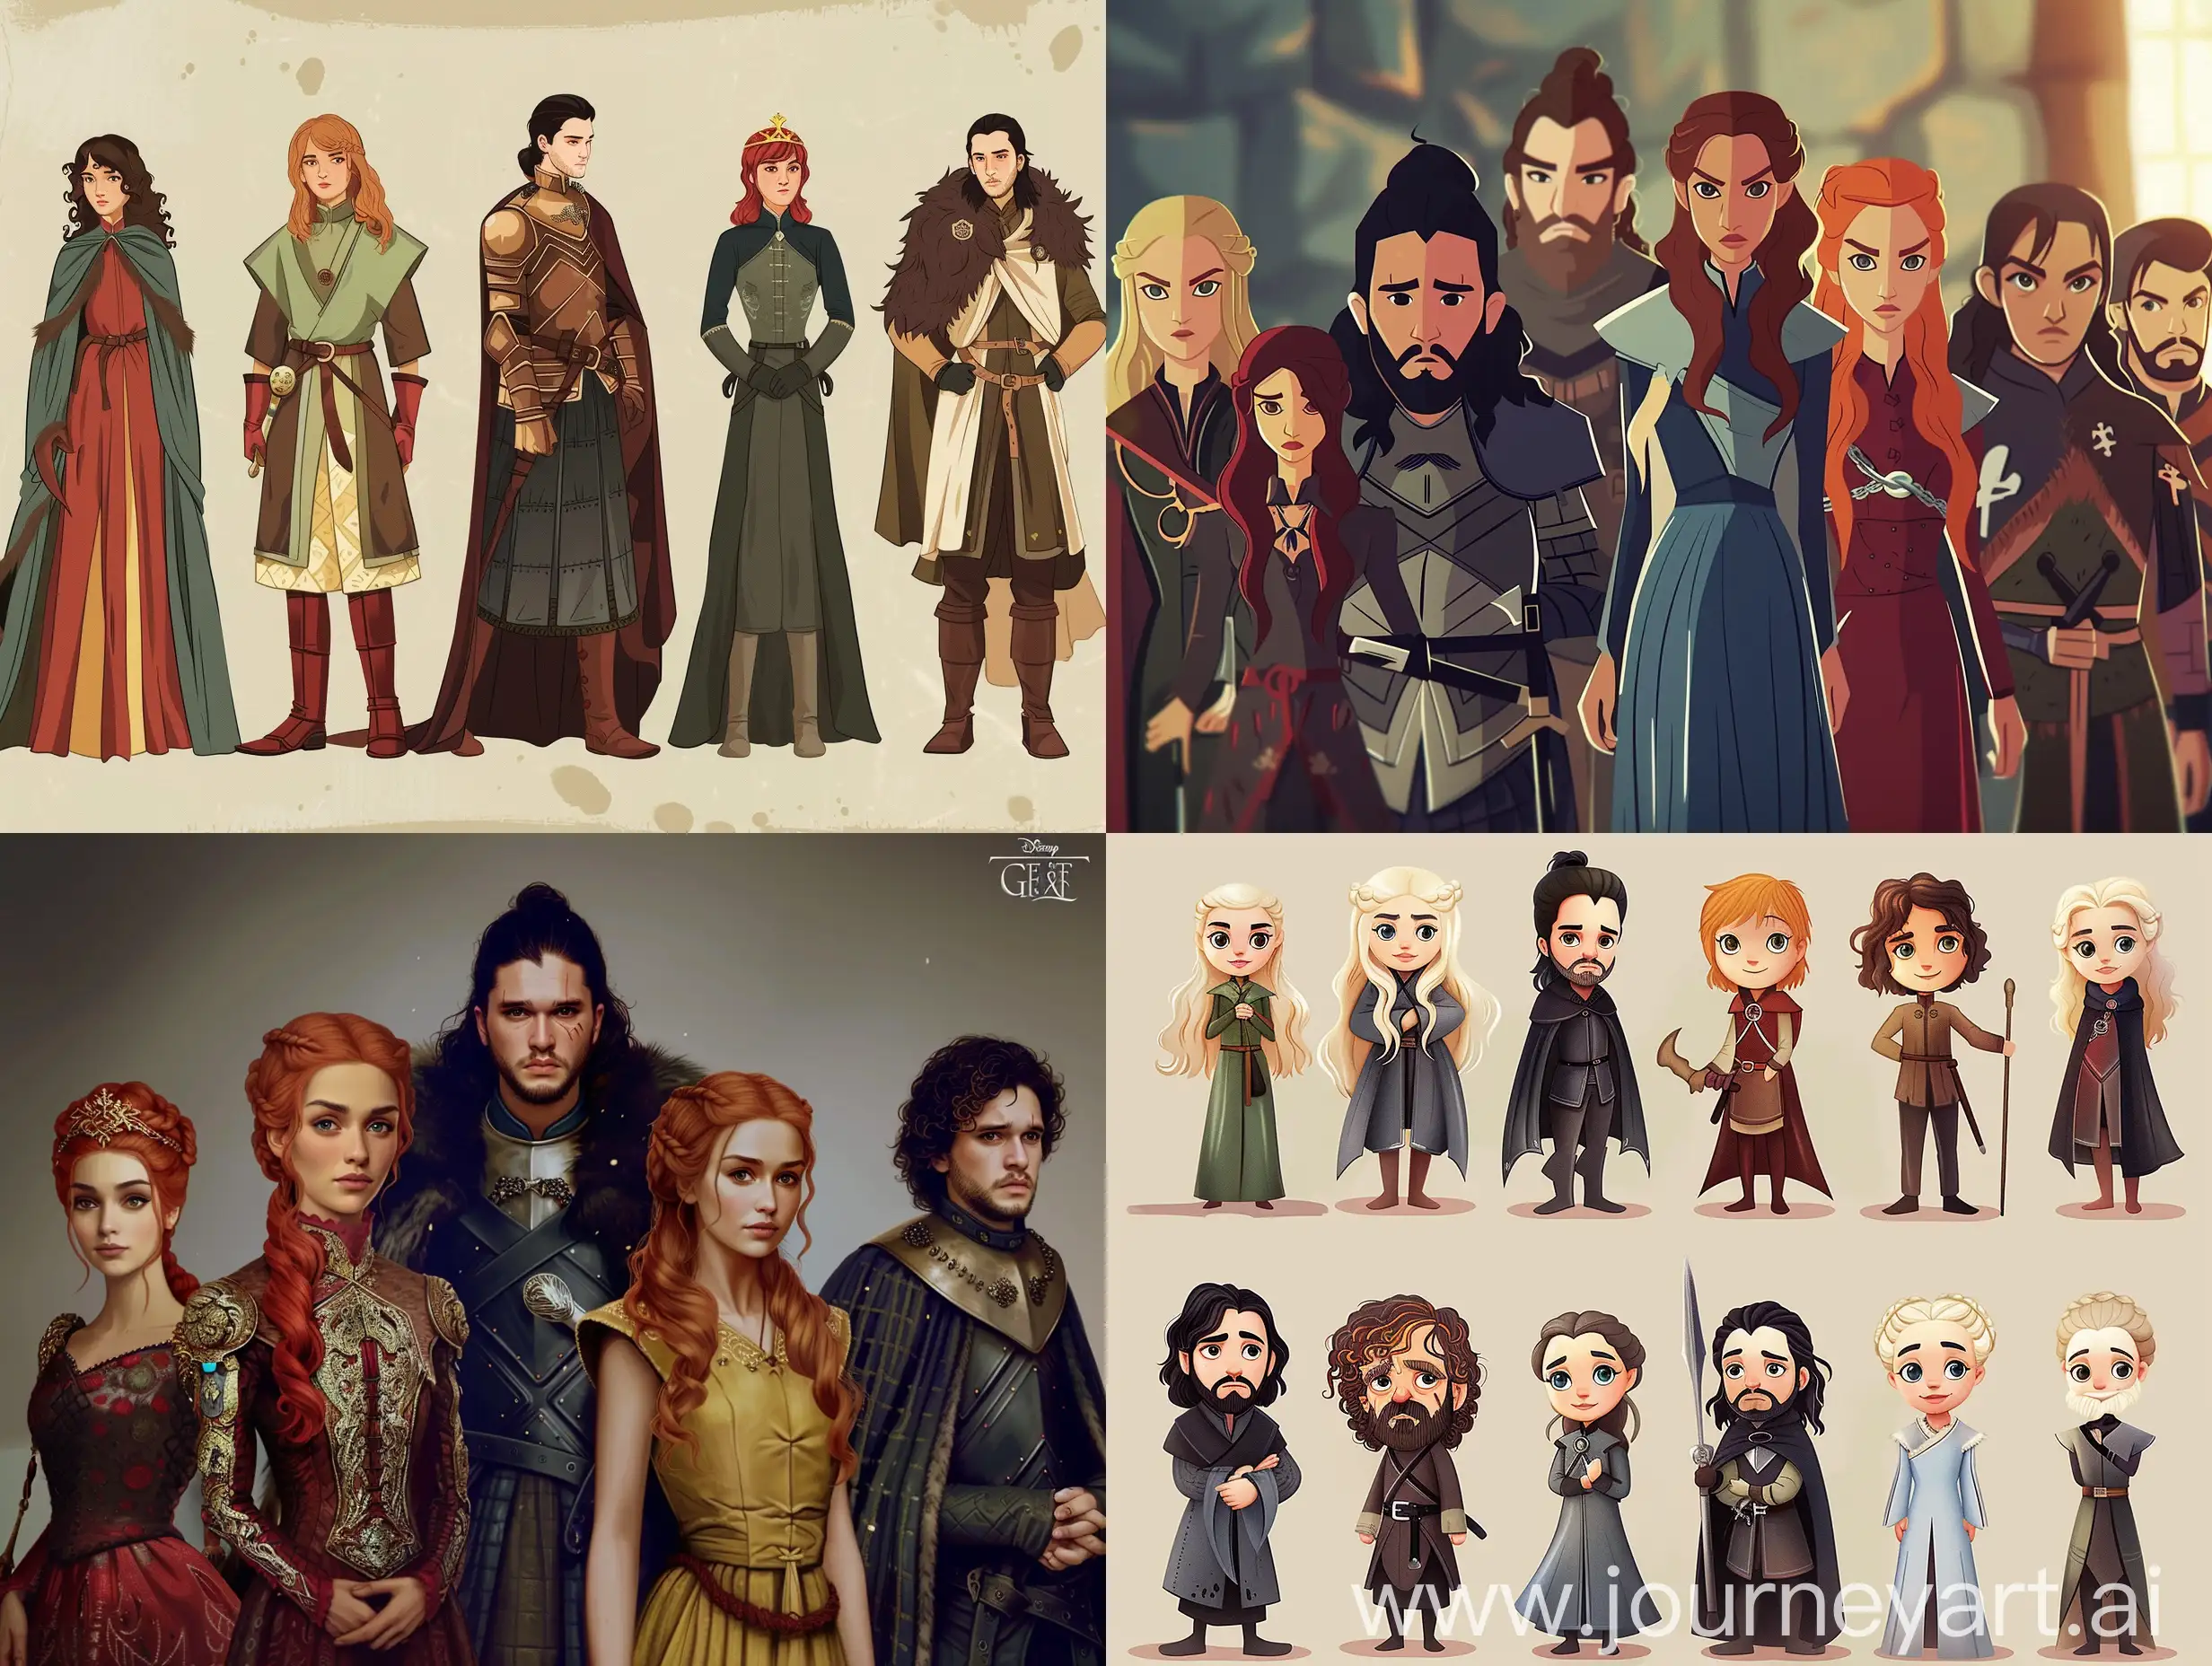  Game Of Thrones characters in the style of Disney Renaissance. 